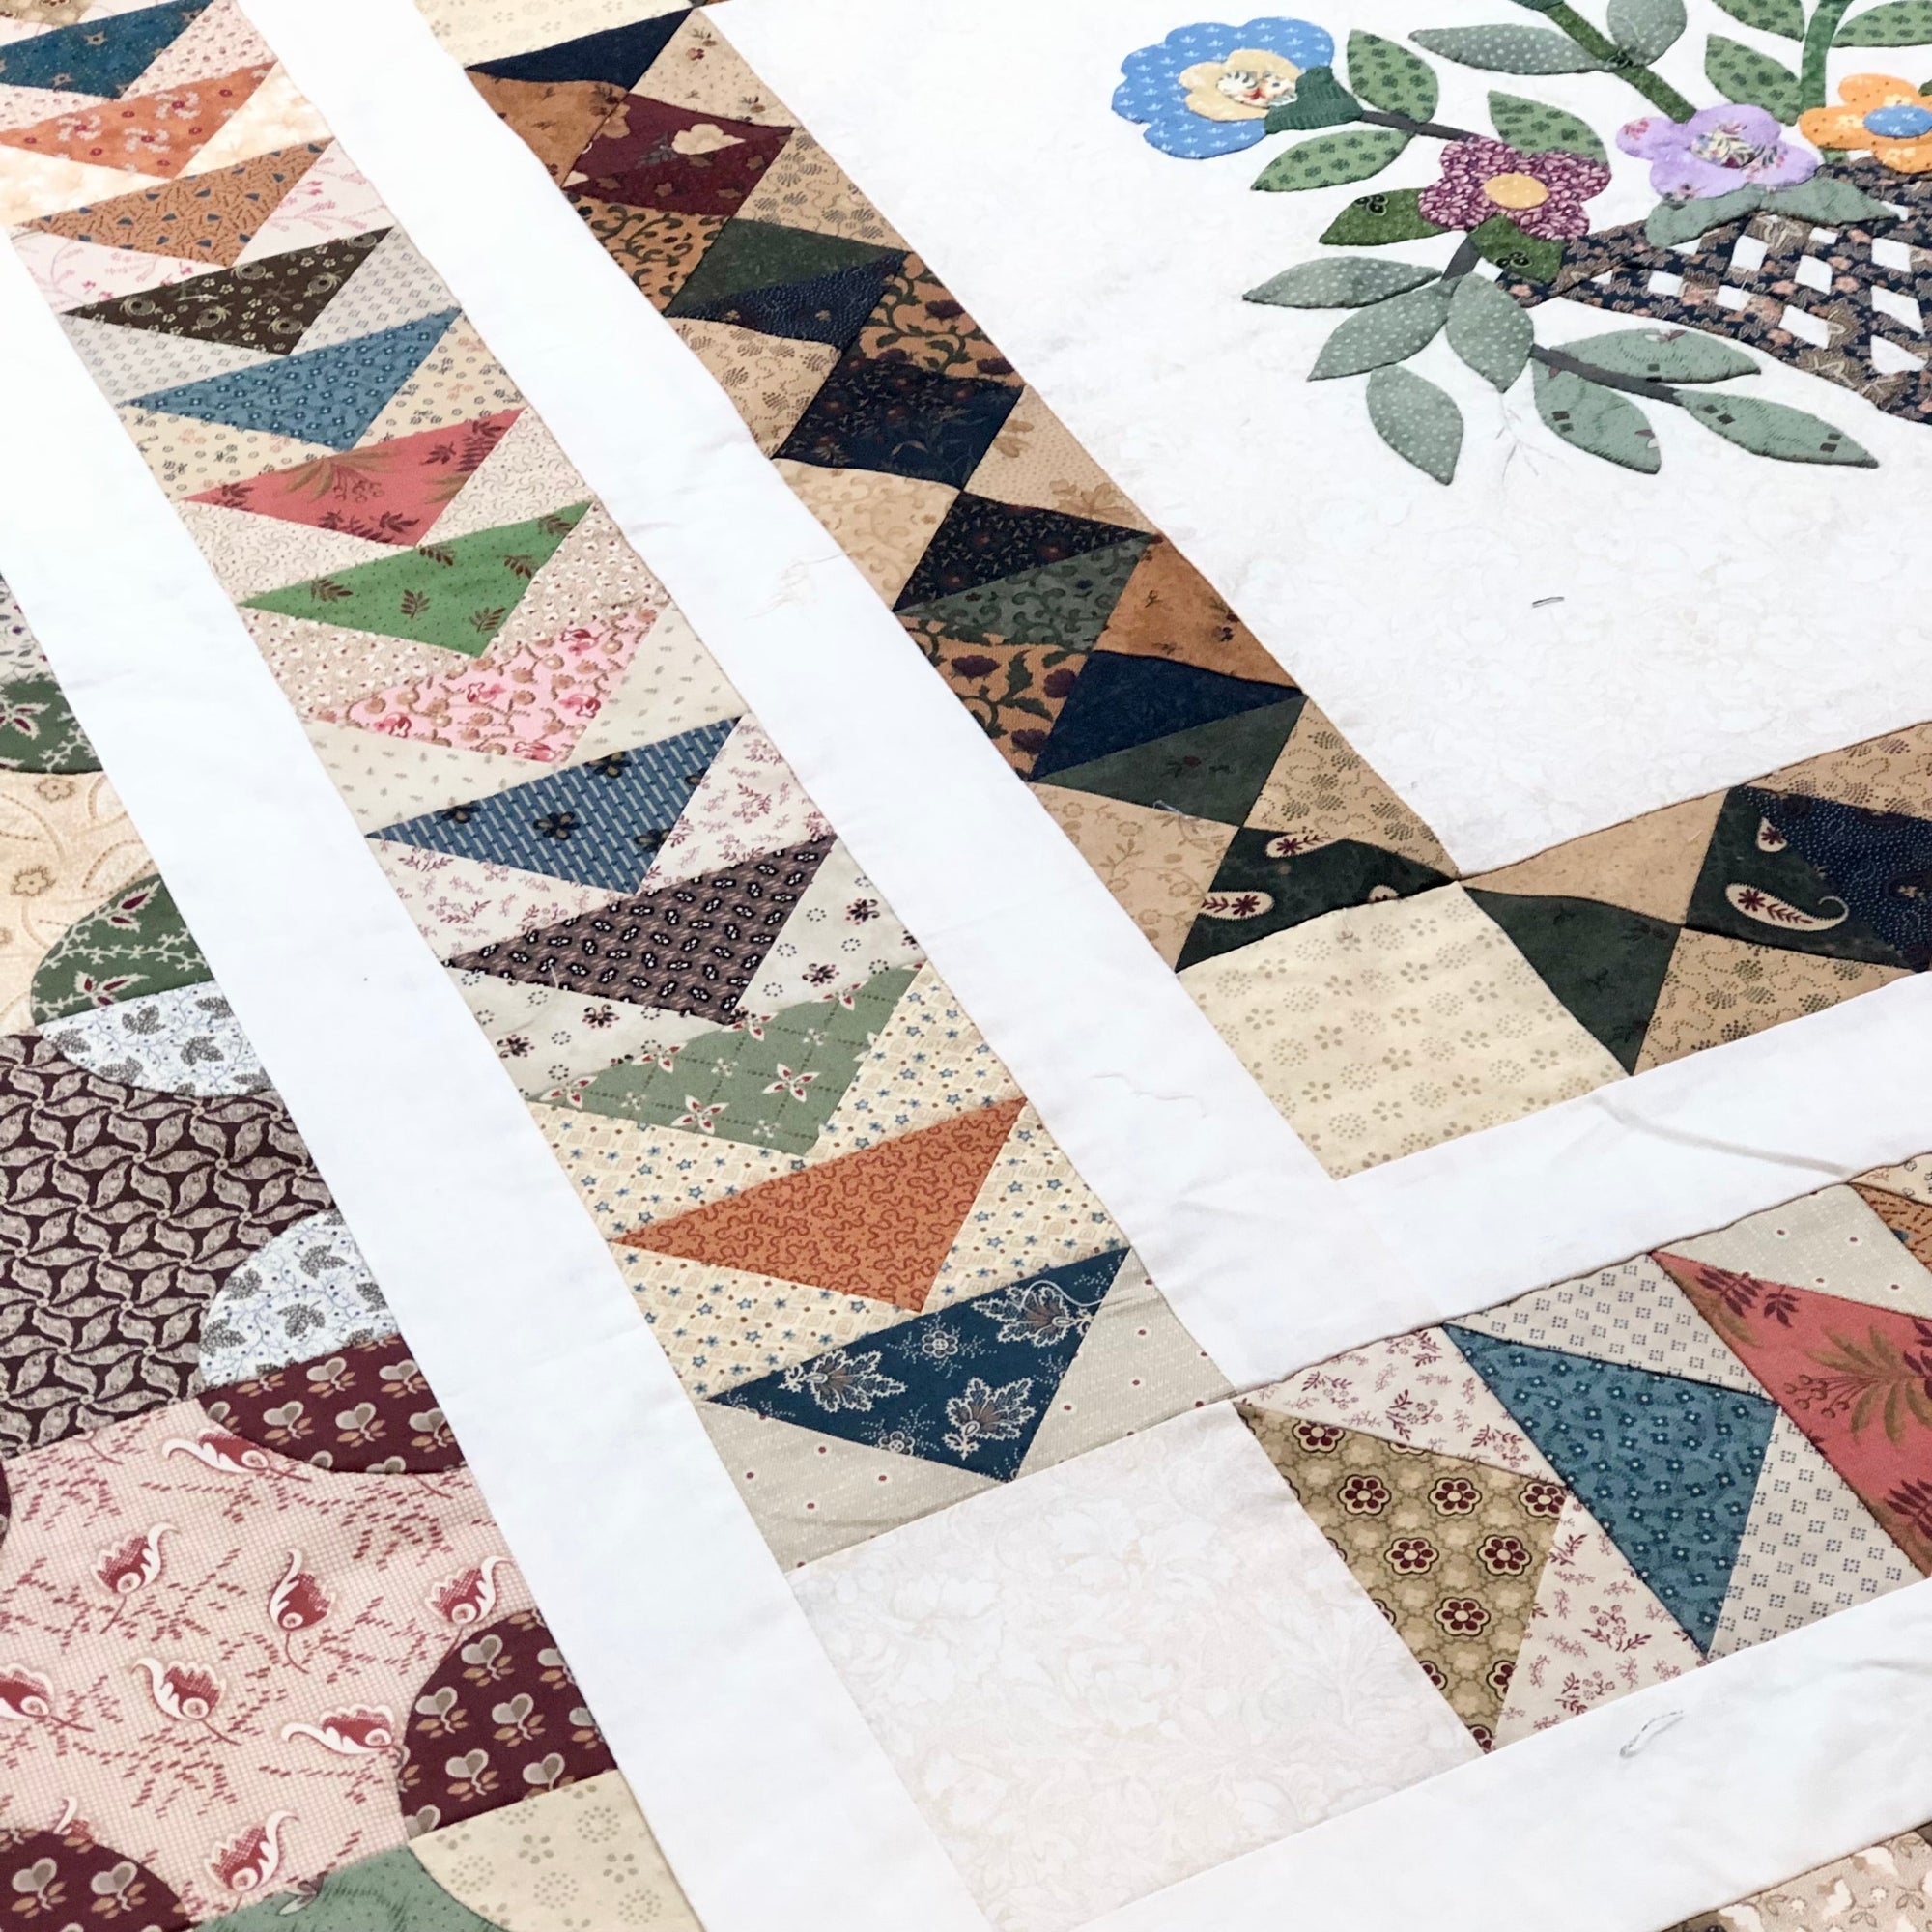 Quilting Drop In - Saturday May 11th 12pm to 3pm $19 per hour